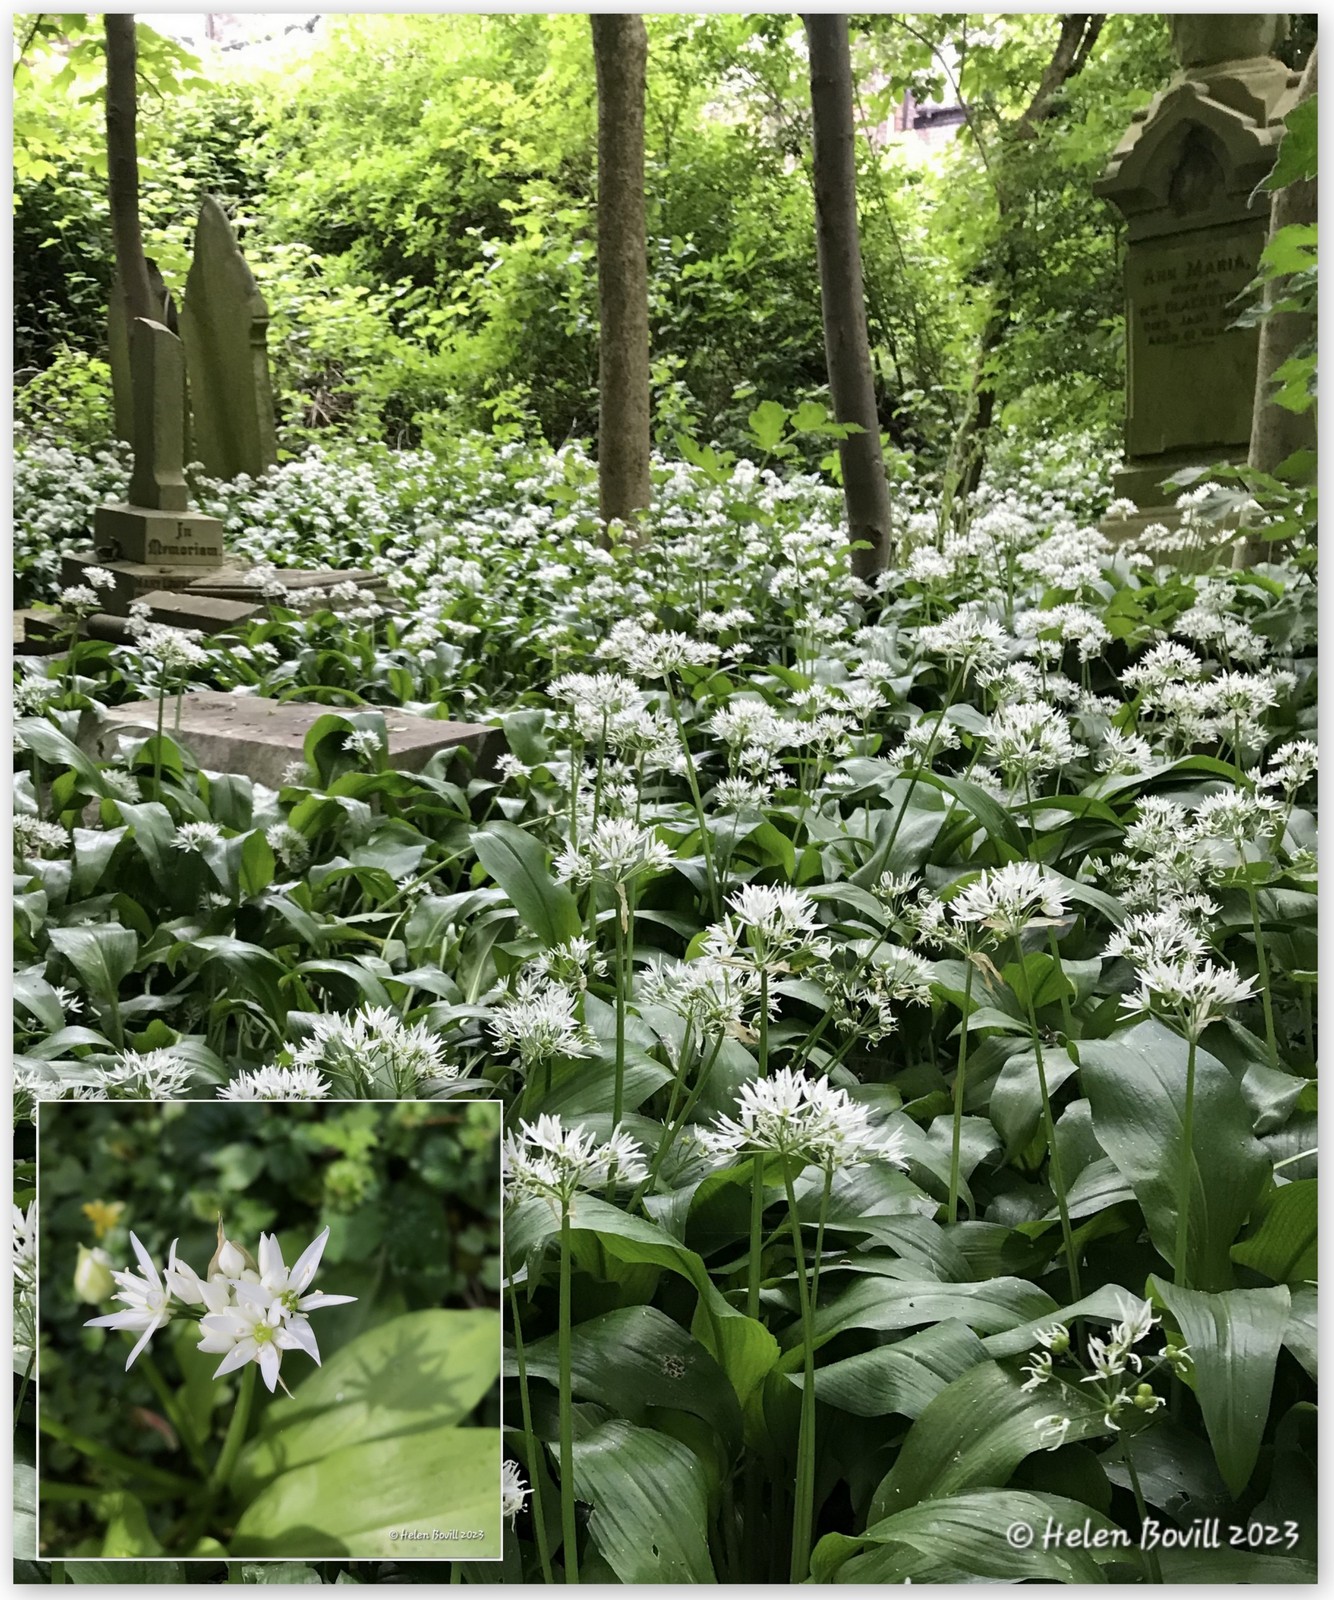 Wild Garlic growing in the cemetery near some headstones